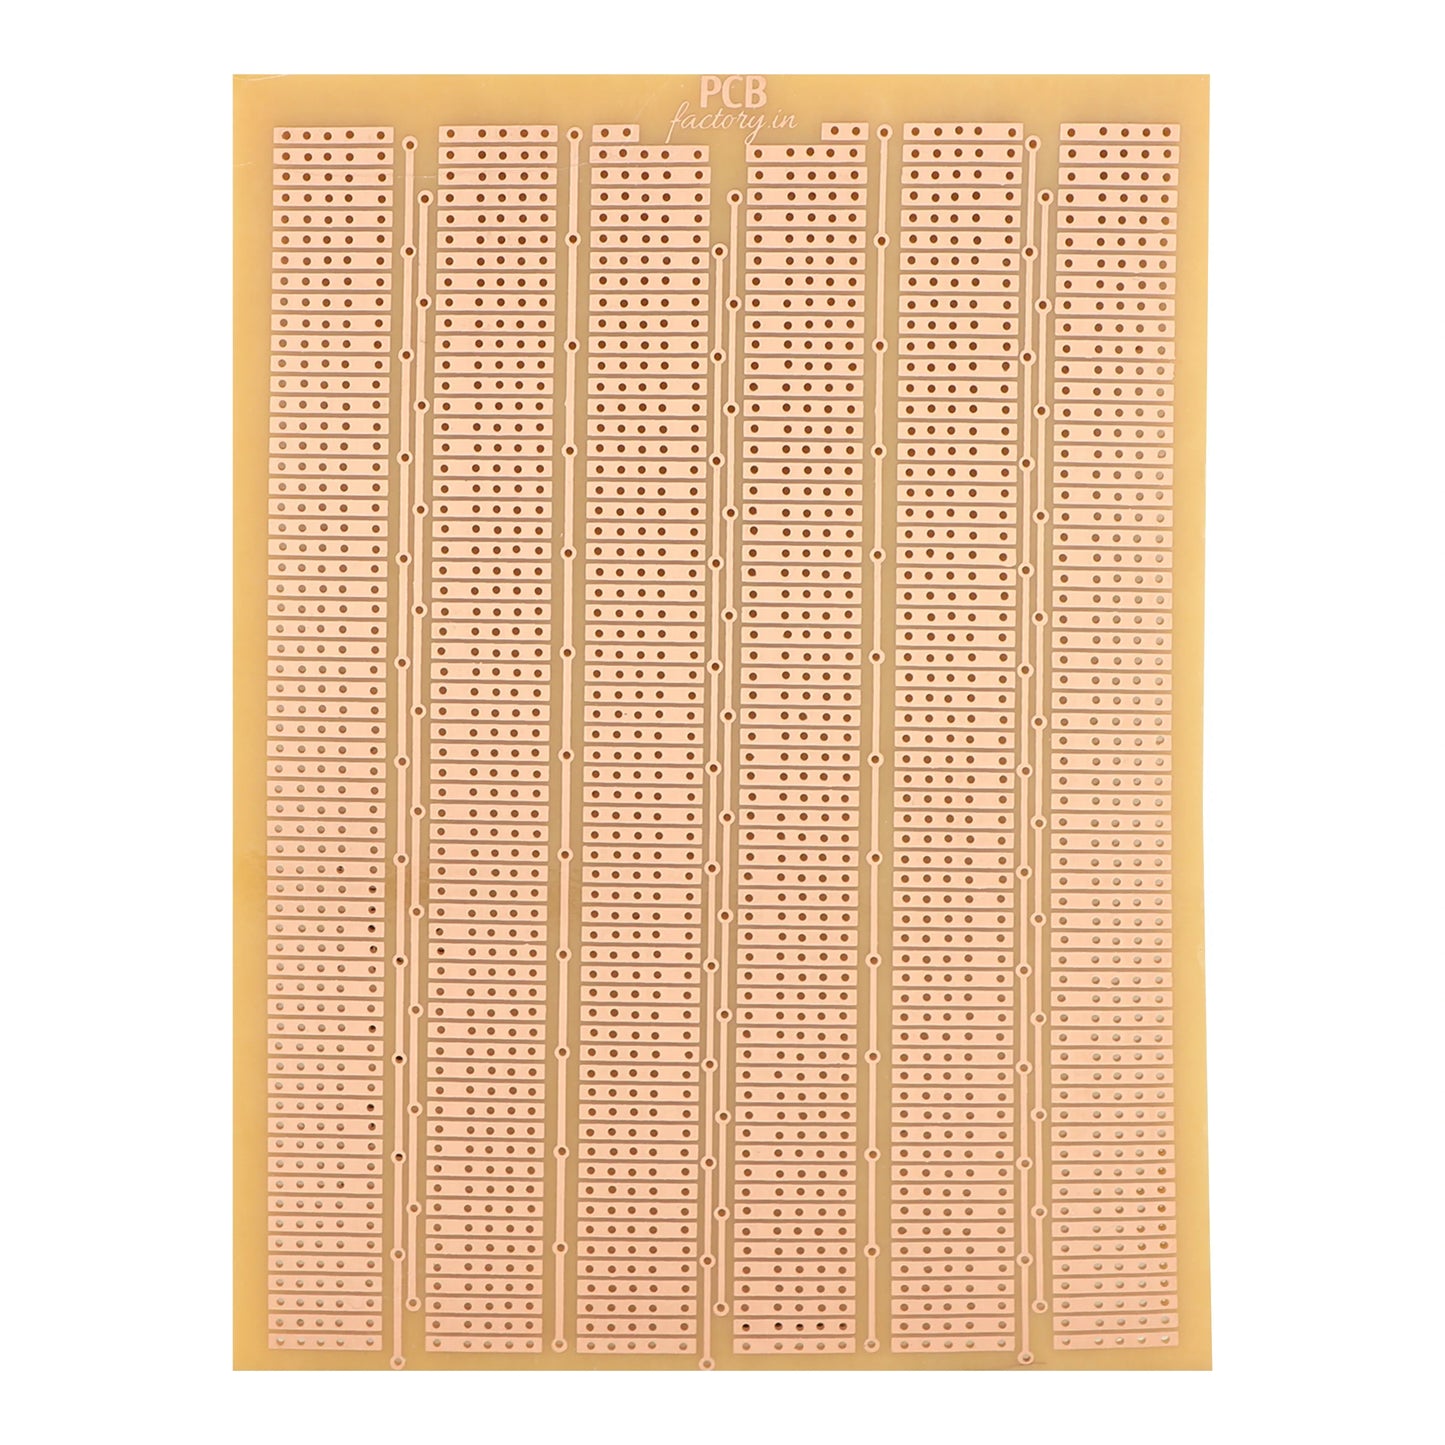 General Purpose PCB Breadboard – FR2 (Set of 5) (120mm x 165mm) – with holes